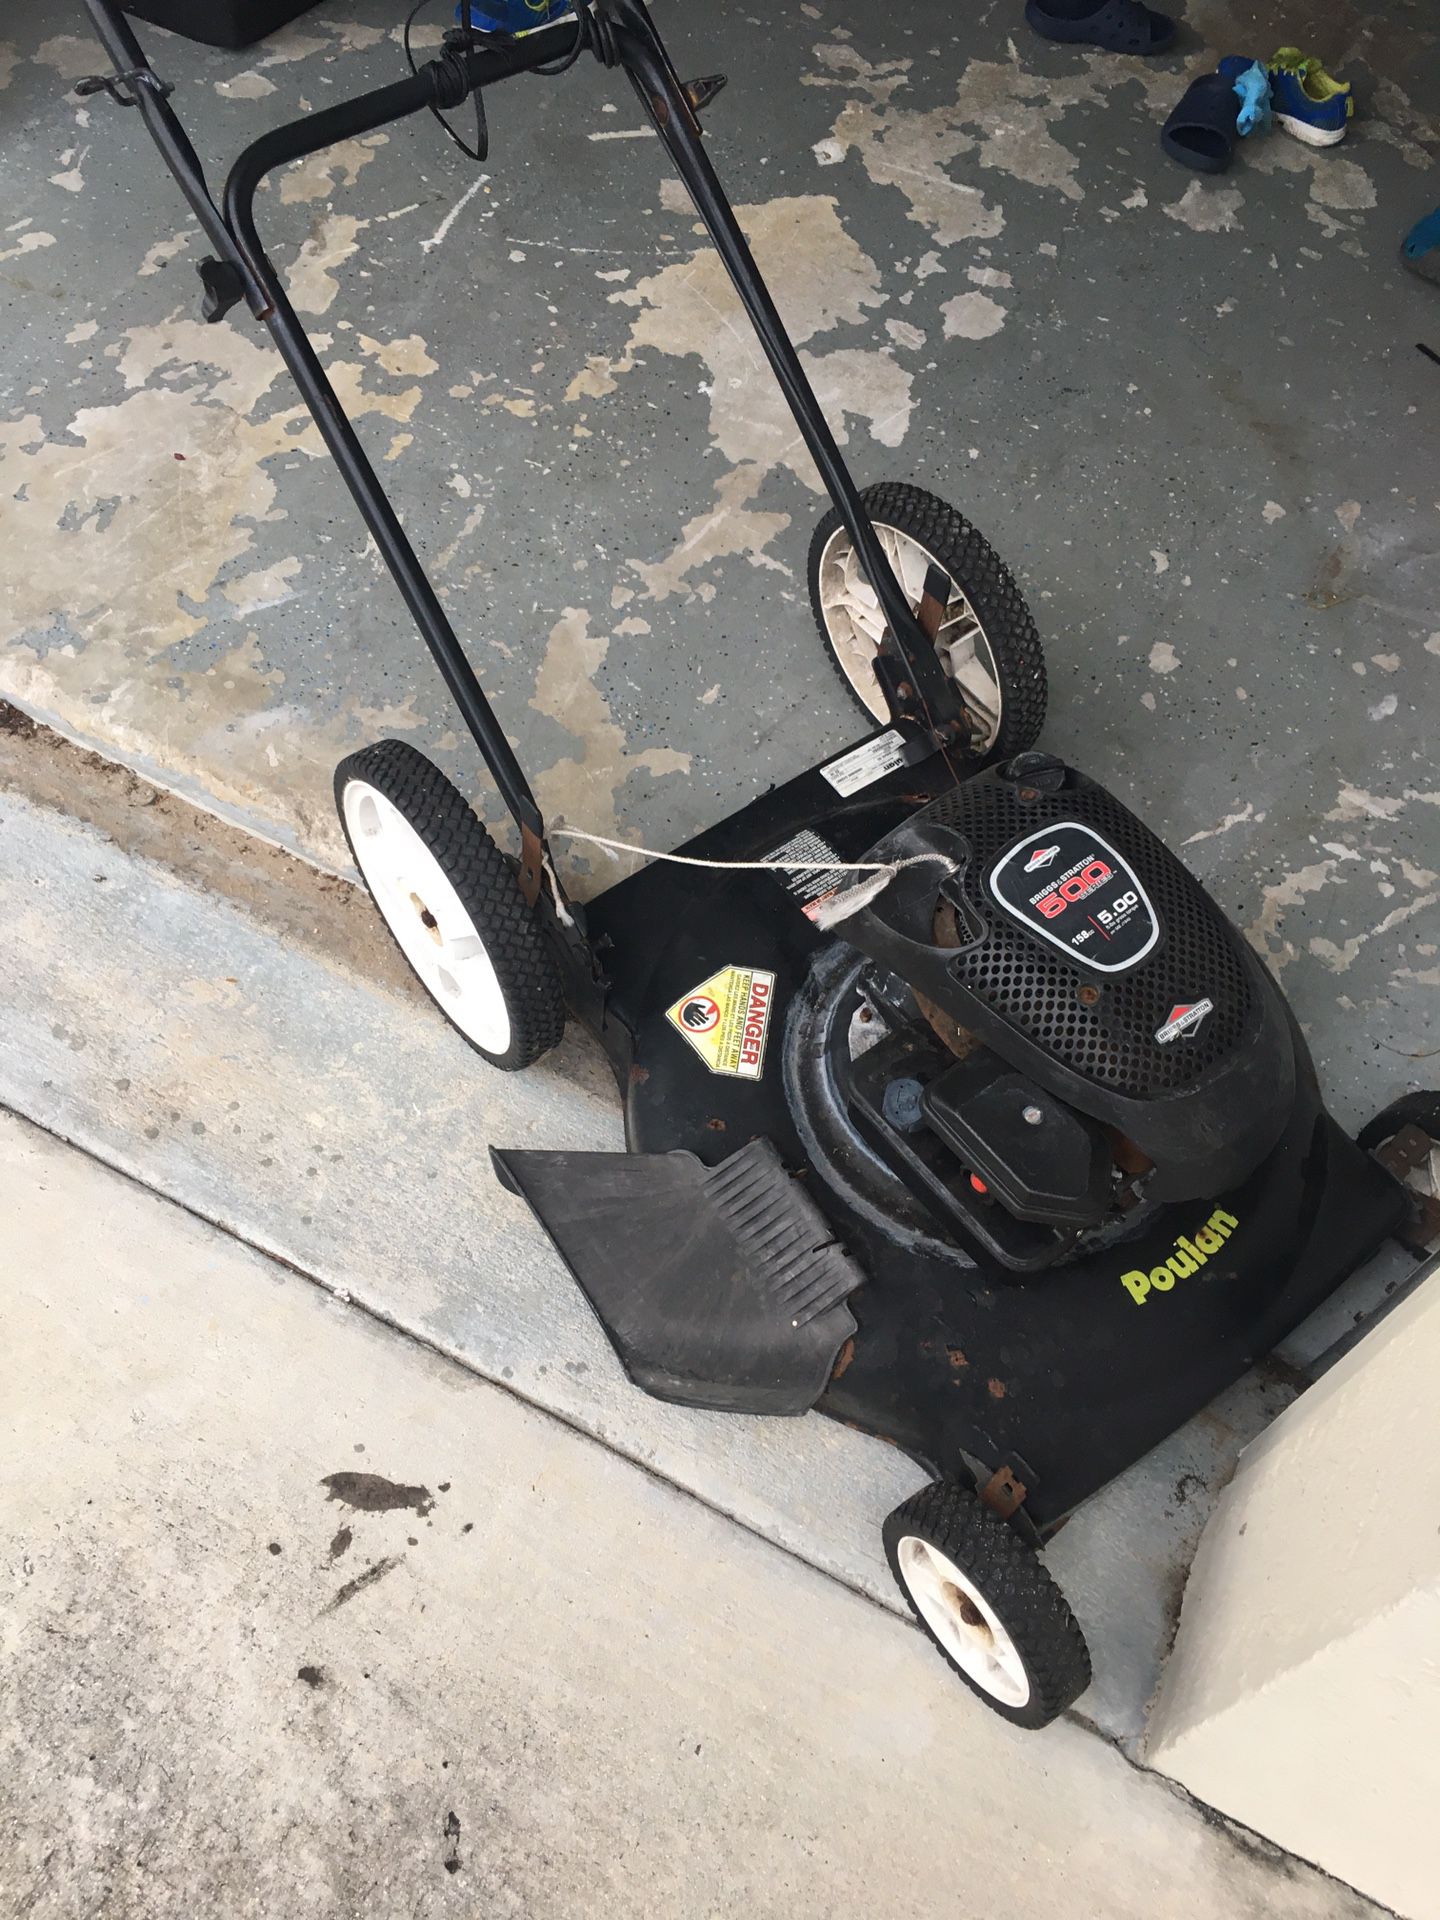 Loan mower for parts